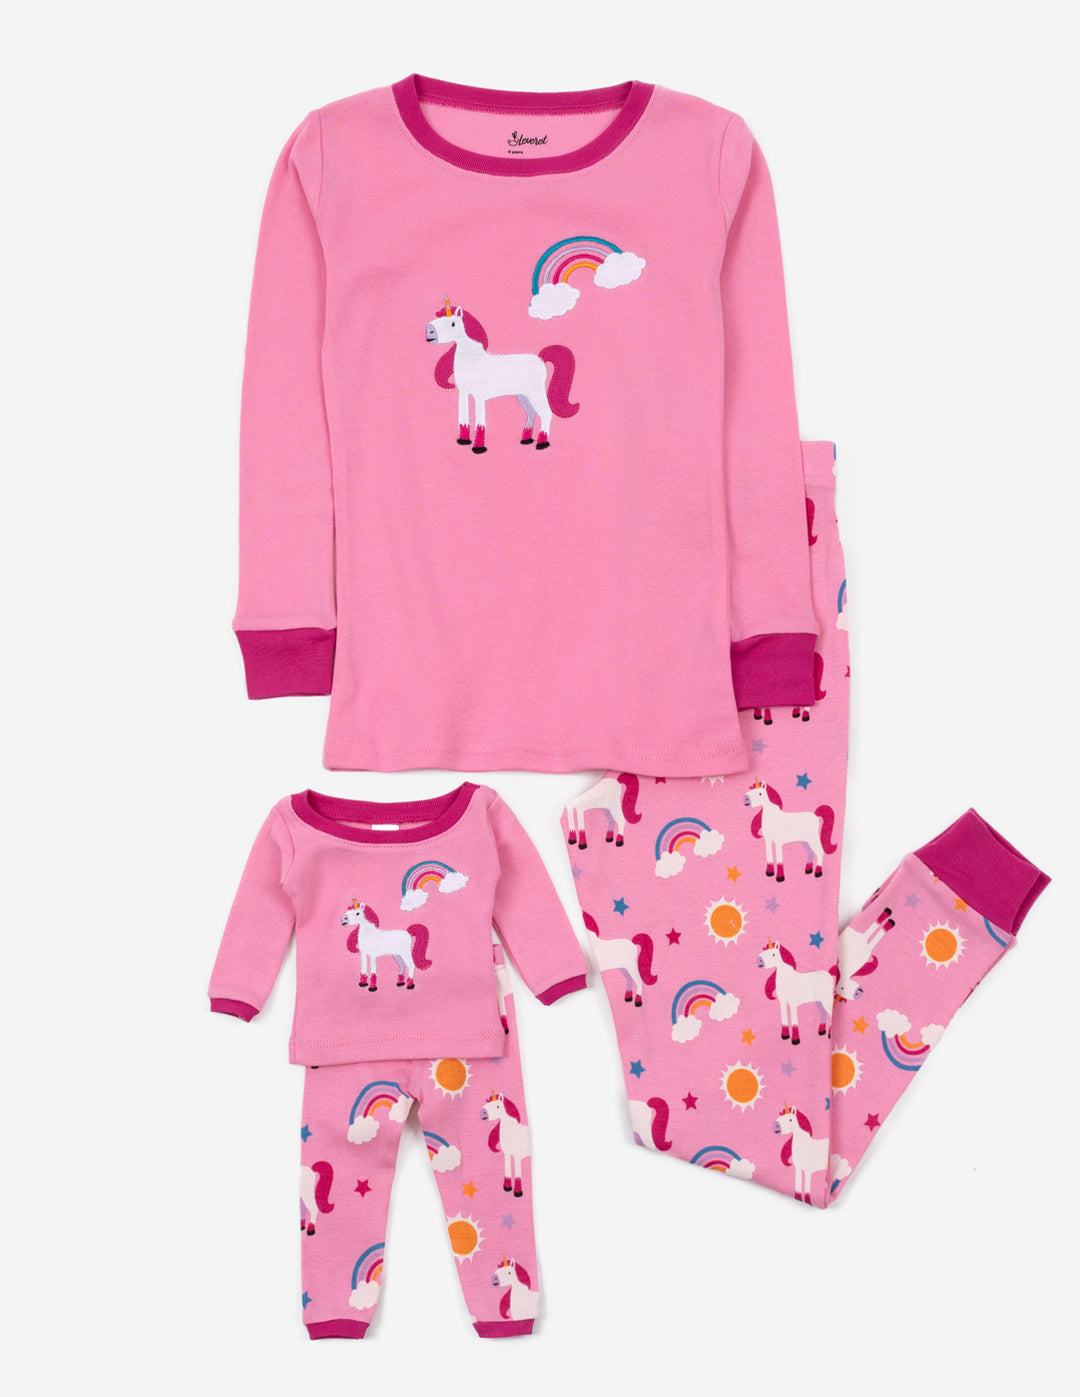 My Brittany's Pink Unicorn Pjs for American Girl Dolls, Our